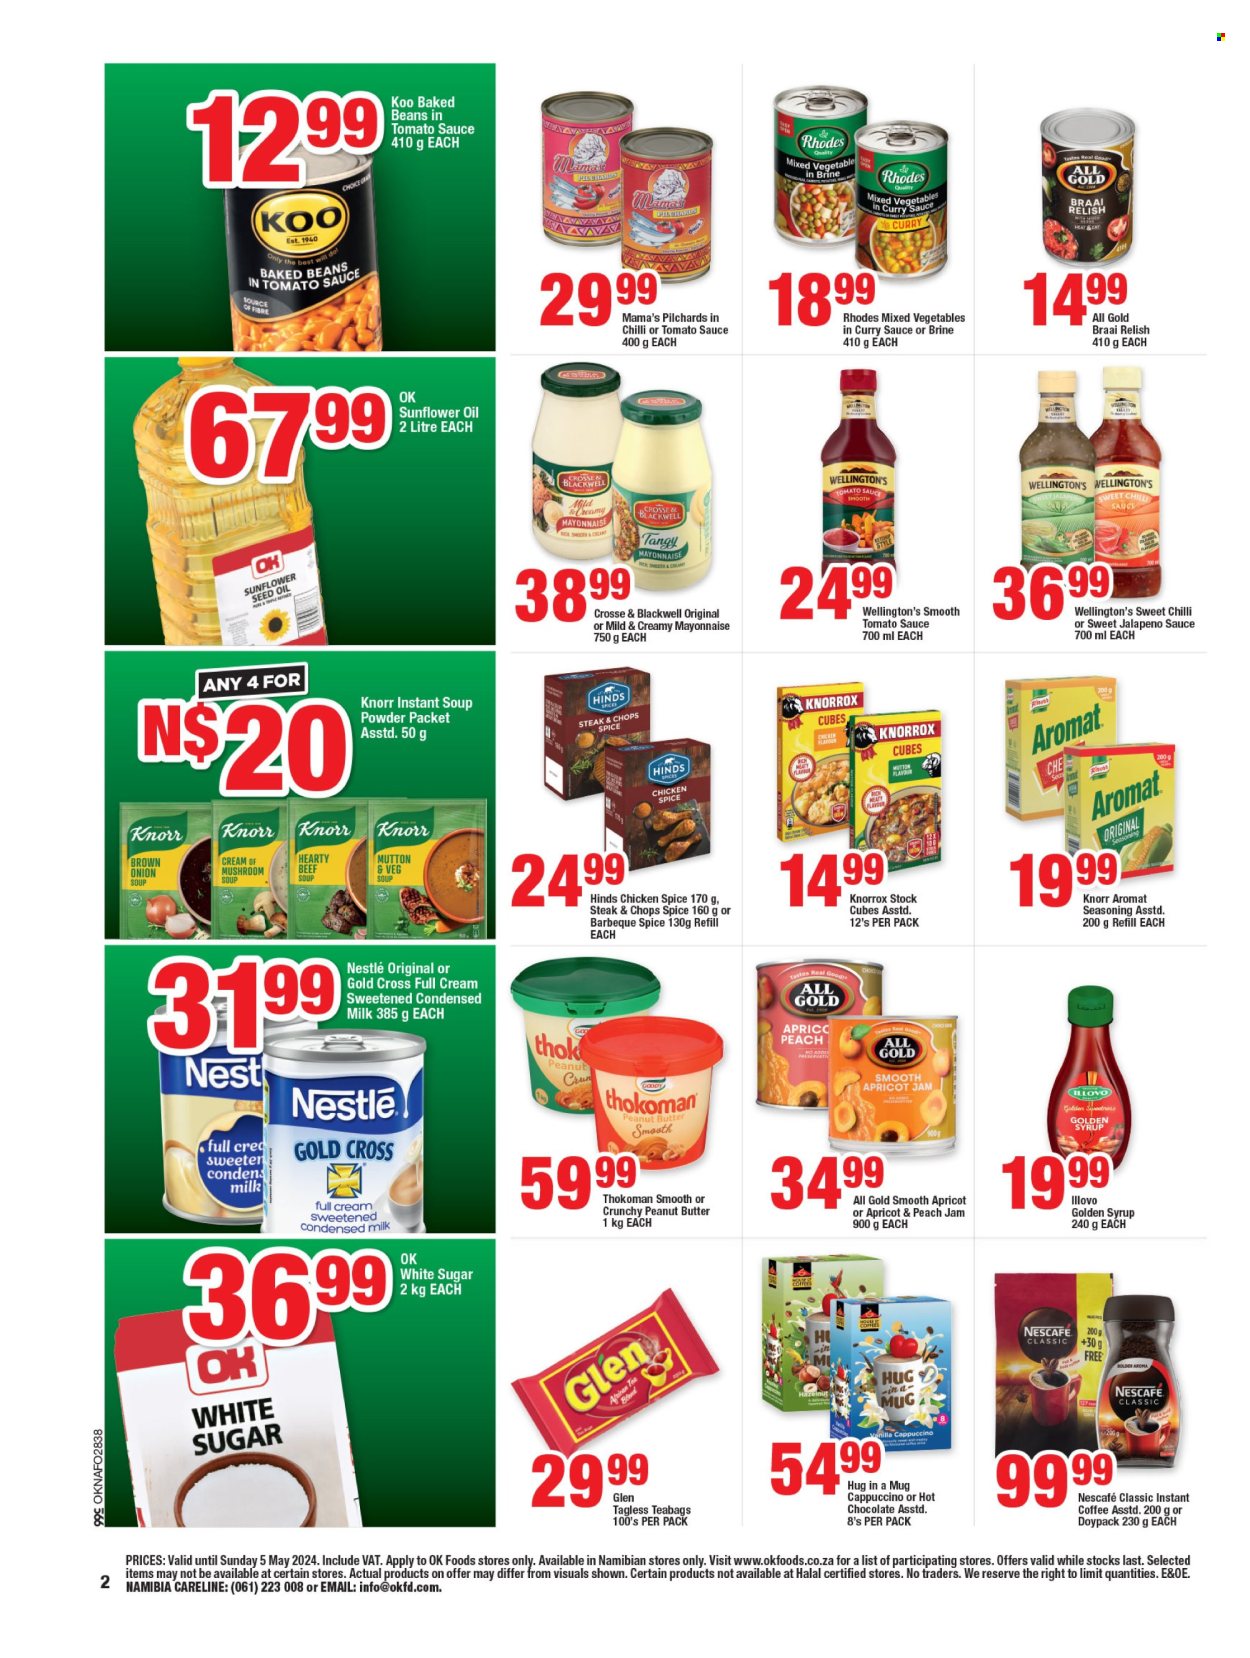 thumbnail - OK catalogue  - 19/04/2024 - 05/05/2024 - Sales products - mixed vegetables, jalapeño, sardines, mushroom soup, onion soup, condensed soup, Knorr, instant soup, Mama's, ready meal, condensed milk, mayonnaise, frozen vegetables, Nestlé, sugar, Knorrox, golden syrup, baked beans, Koo, relish, spice, Hinds, seasoning, sweet chilli sauce, curry sauce, sunflower oil, oil, apricot jam, fruit jam, peanut butter, syrup, jam, hot chocolate, tea bags, cappuccino, coffee, instant coffee, Nescafé, steak, mutton meat. Page 2.